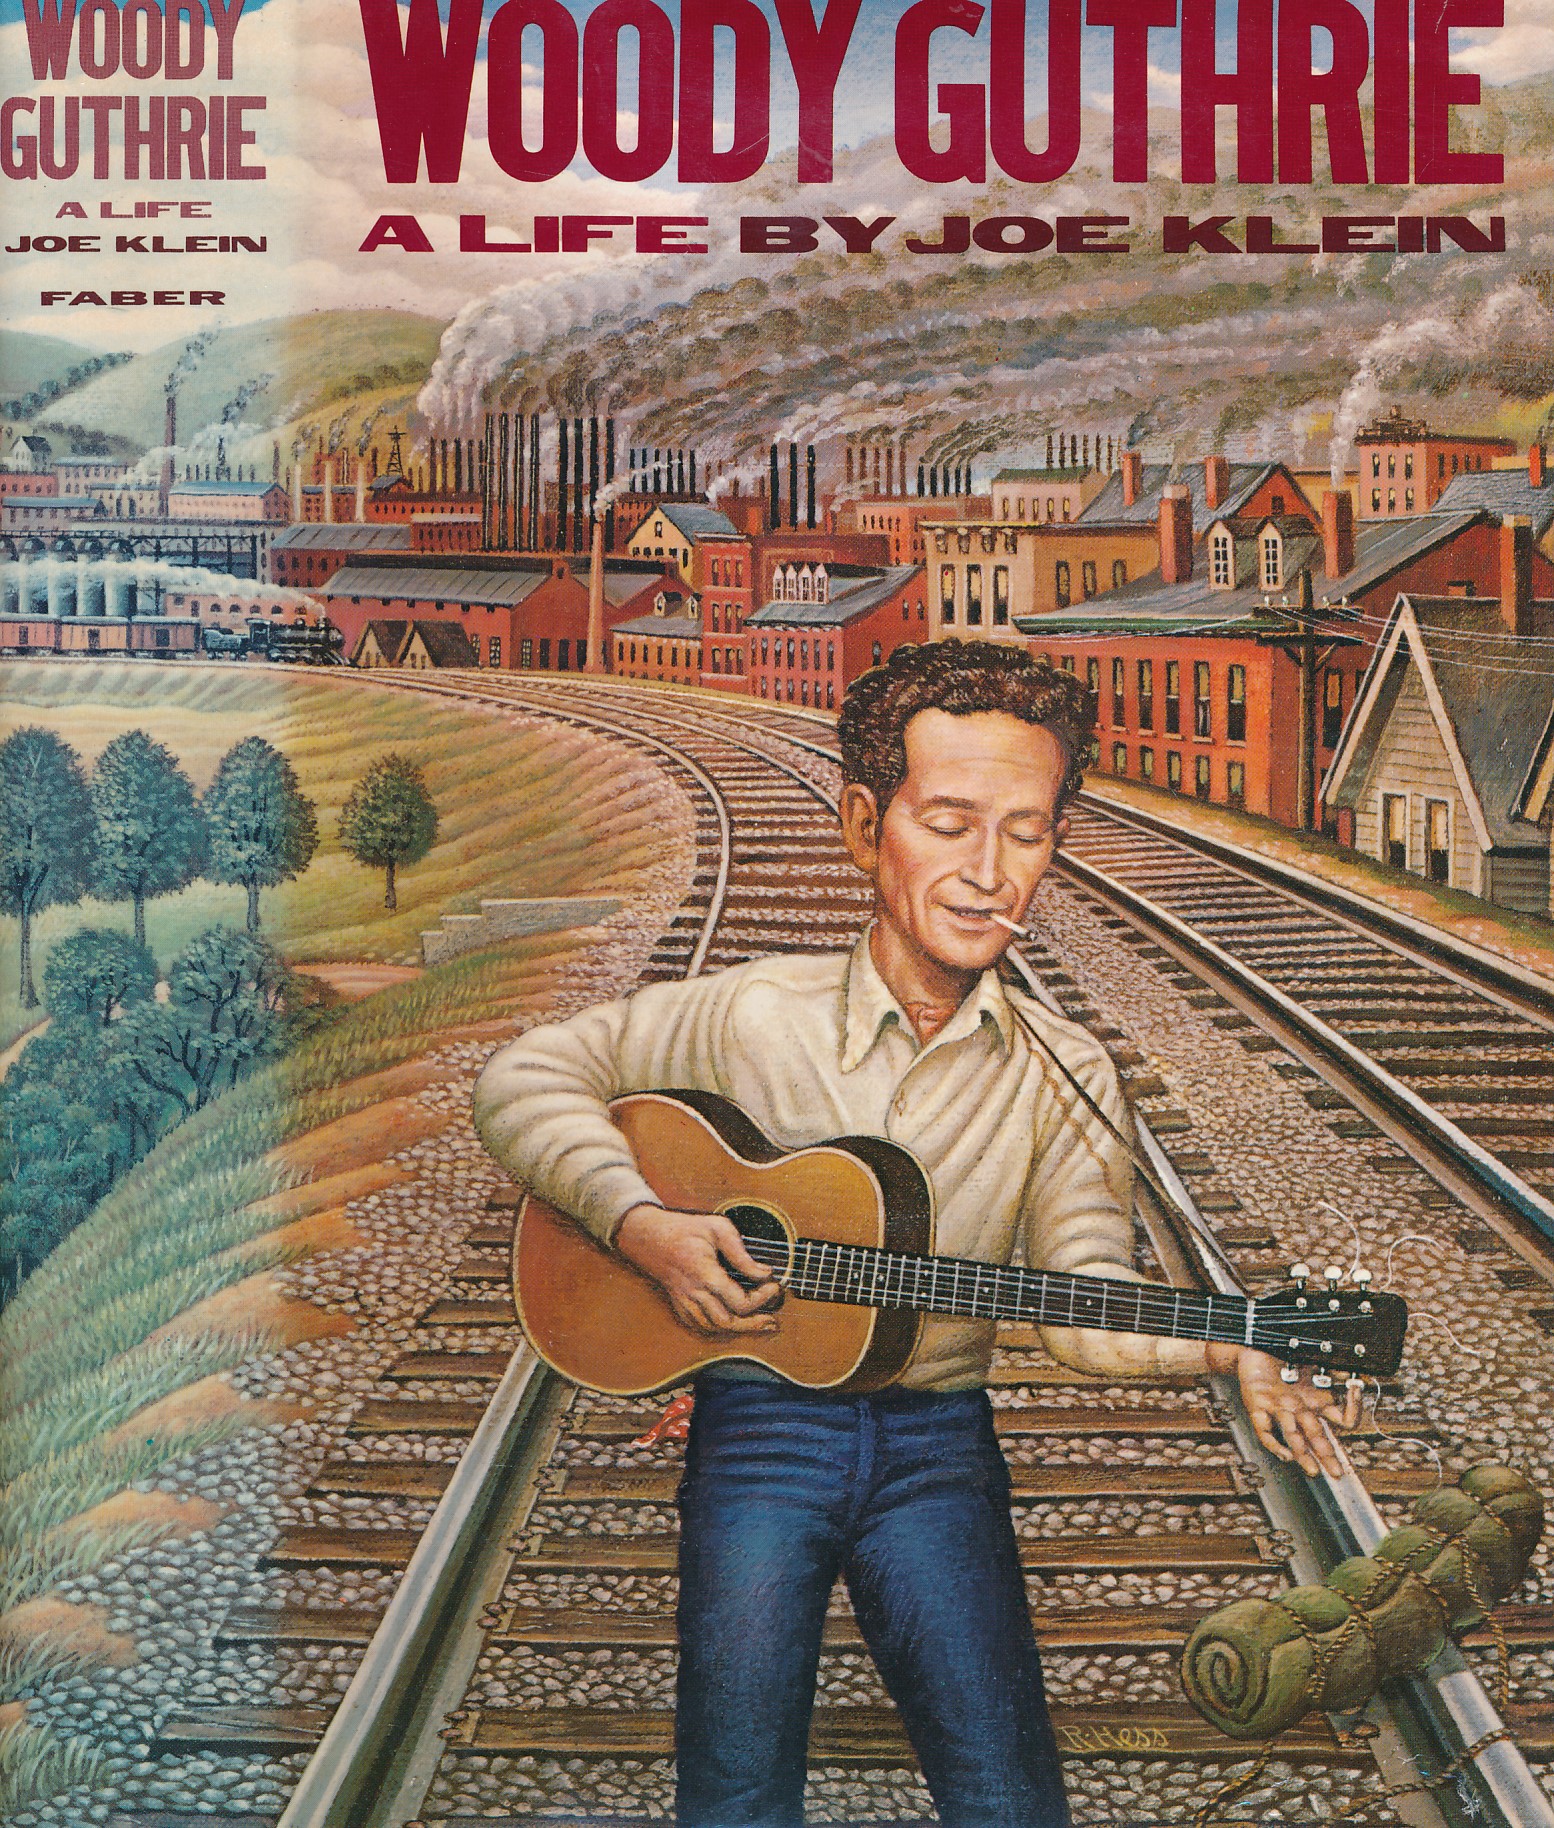 Woody Guthrie. A Life.